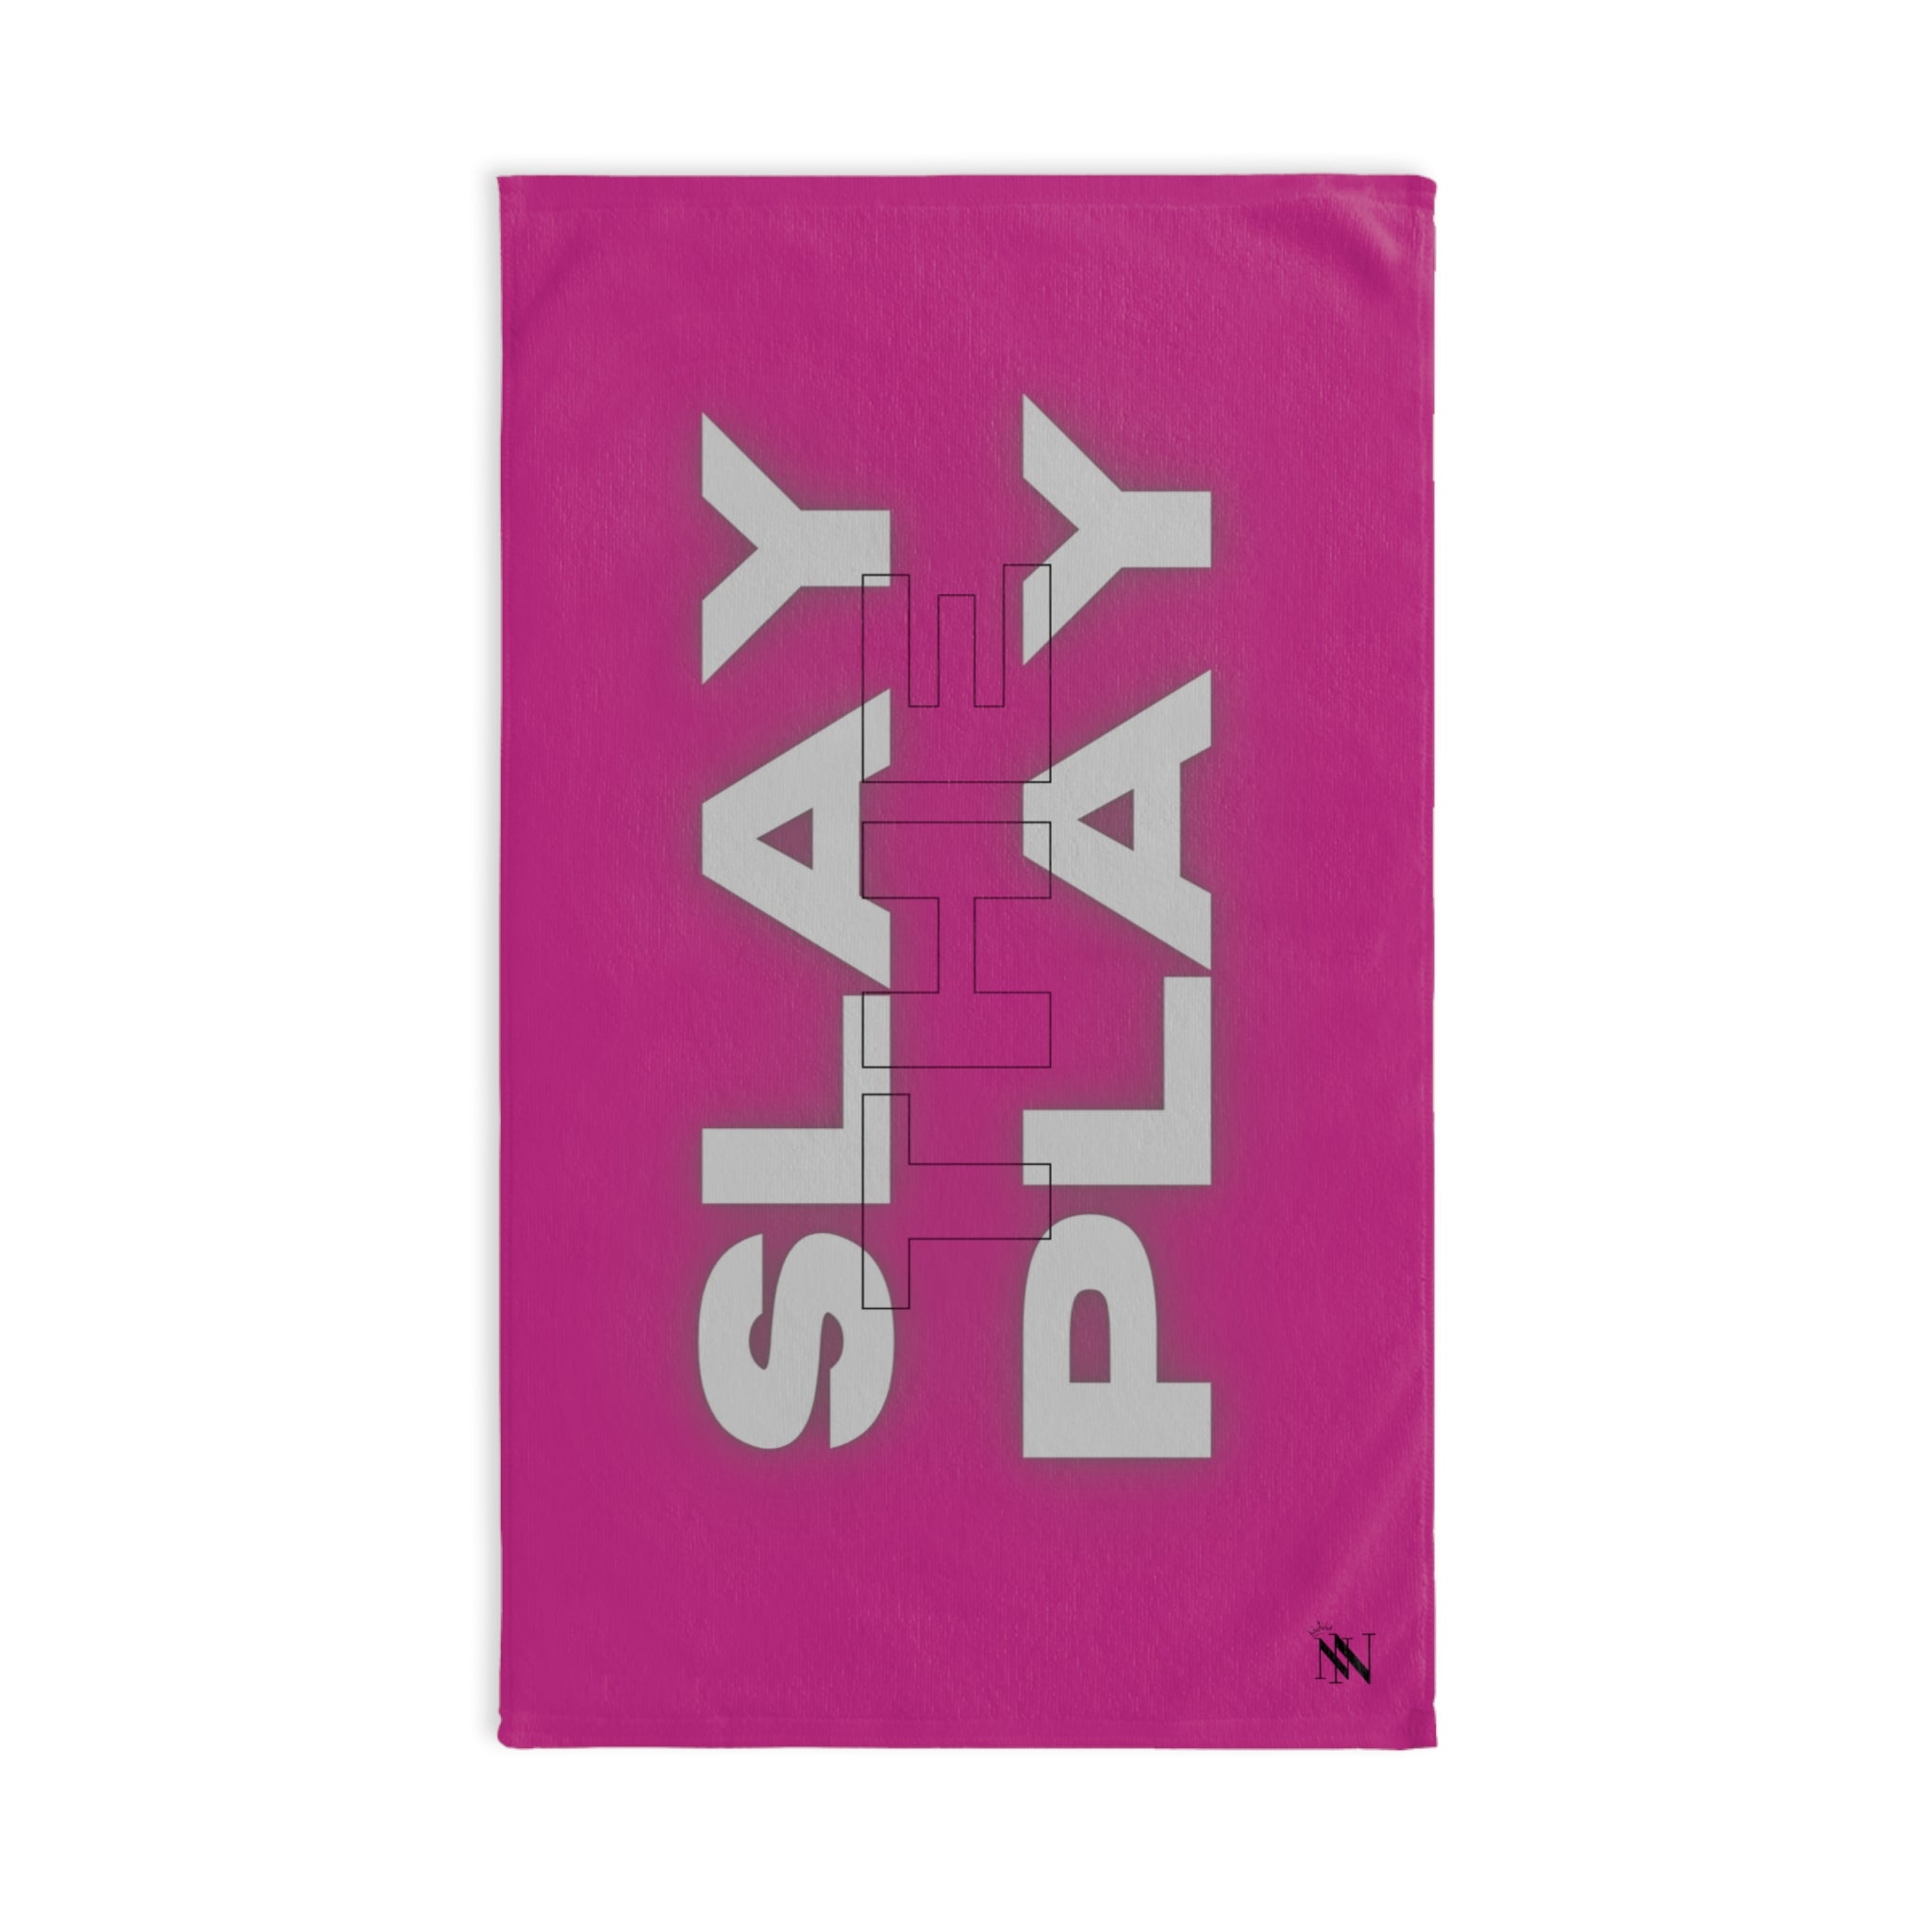 Slay Play Fit Fuscia | Funny Gifts for Men - Gifts for Him - Birthday Gifts for Men, Him, Husband, Boyfriend, New Couple Gifts, Fathers & Valentines Day Gifts, Hand Towels NECTAR NAPKINS